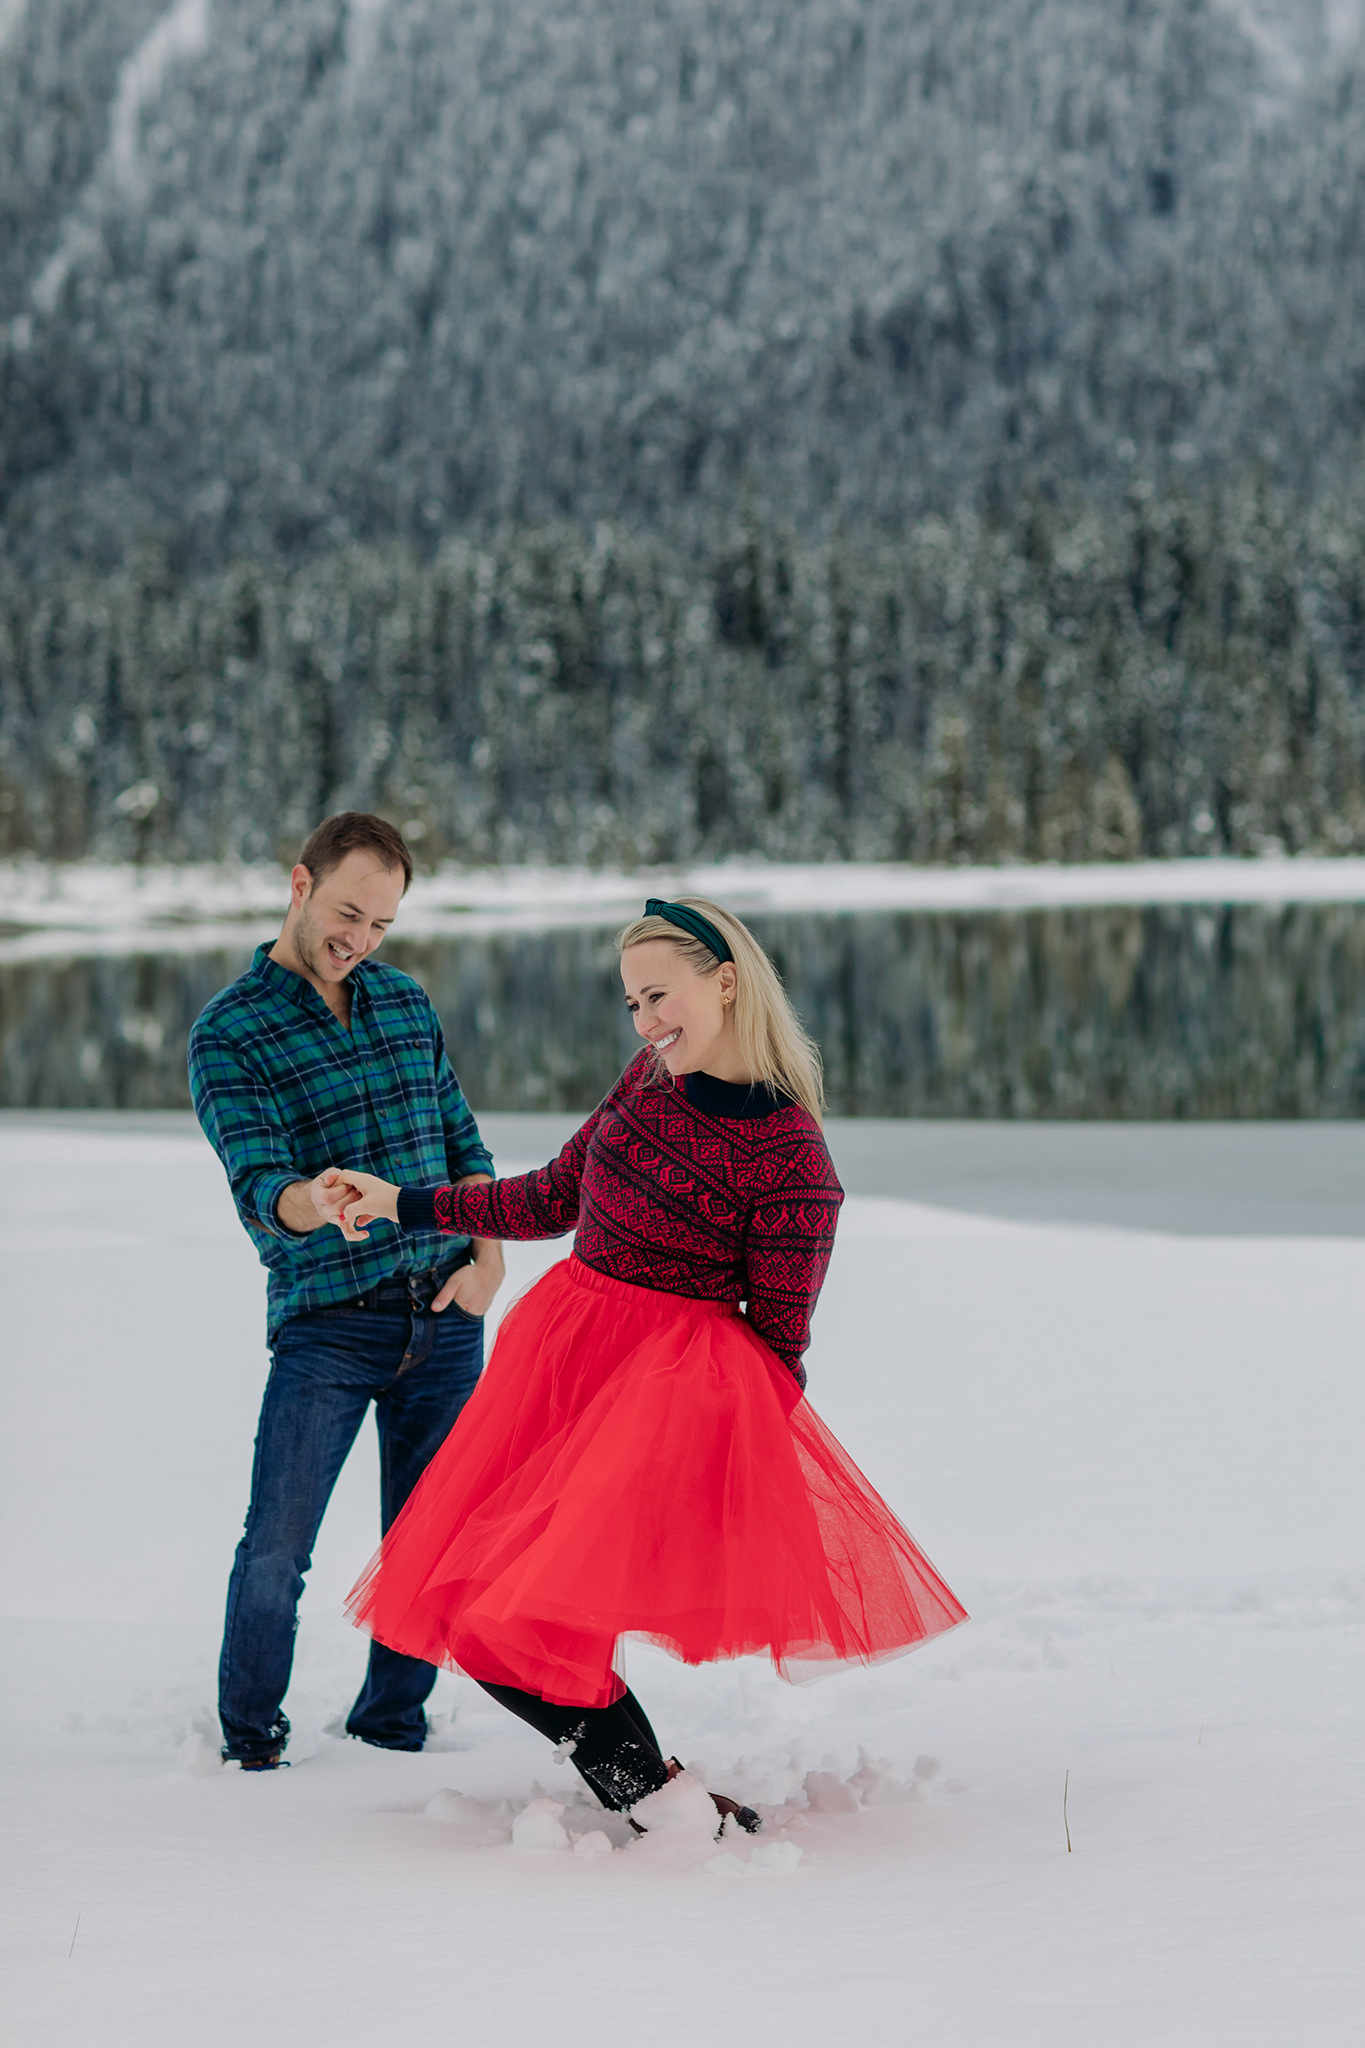 emerald lake winter engagement photos with freshly frozen lake featuring playful red tulle skirt & nordic sweater